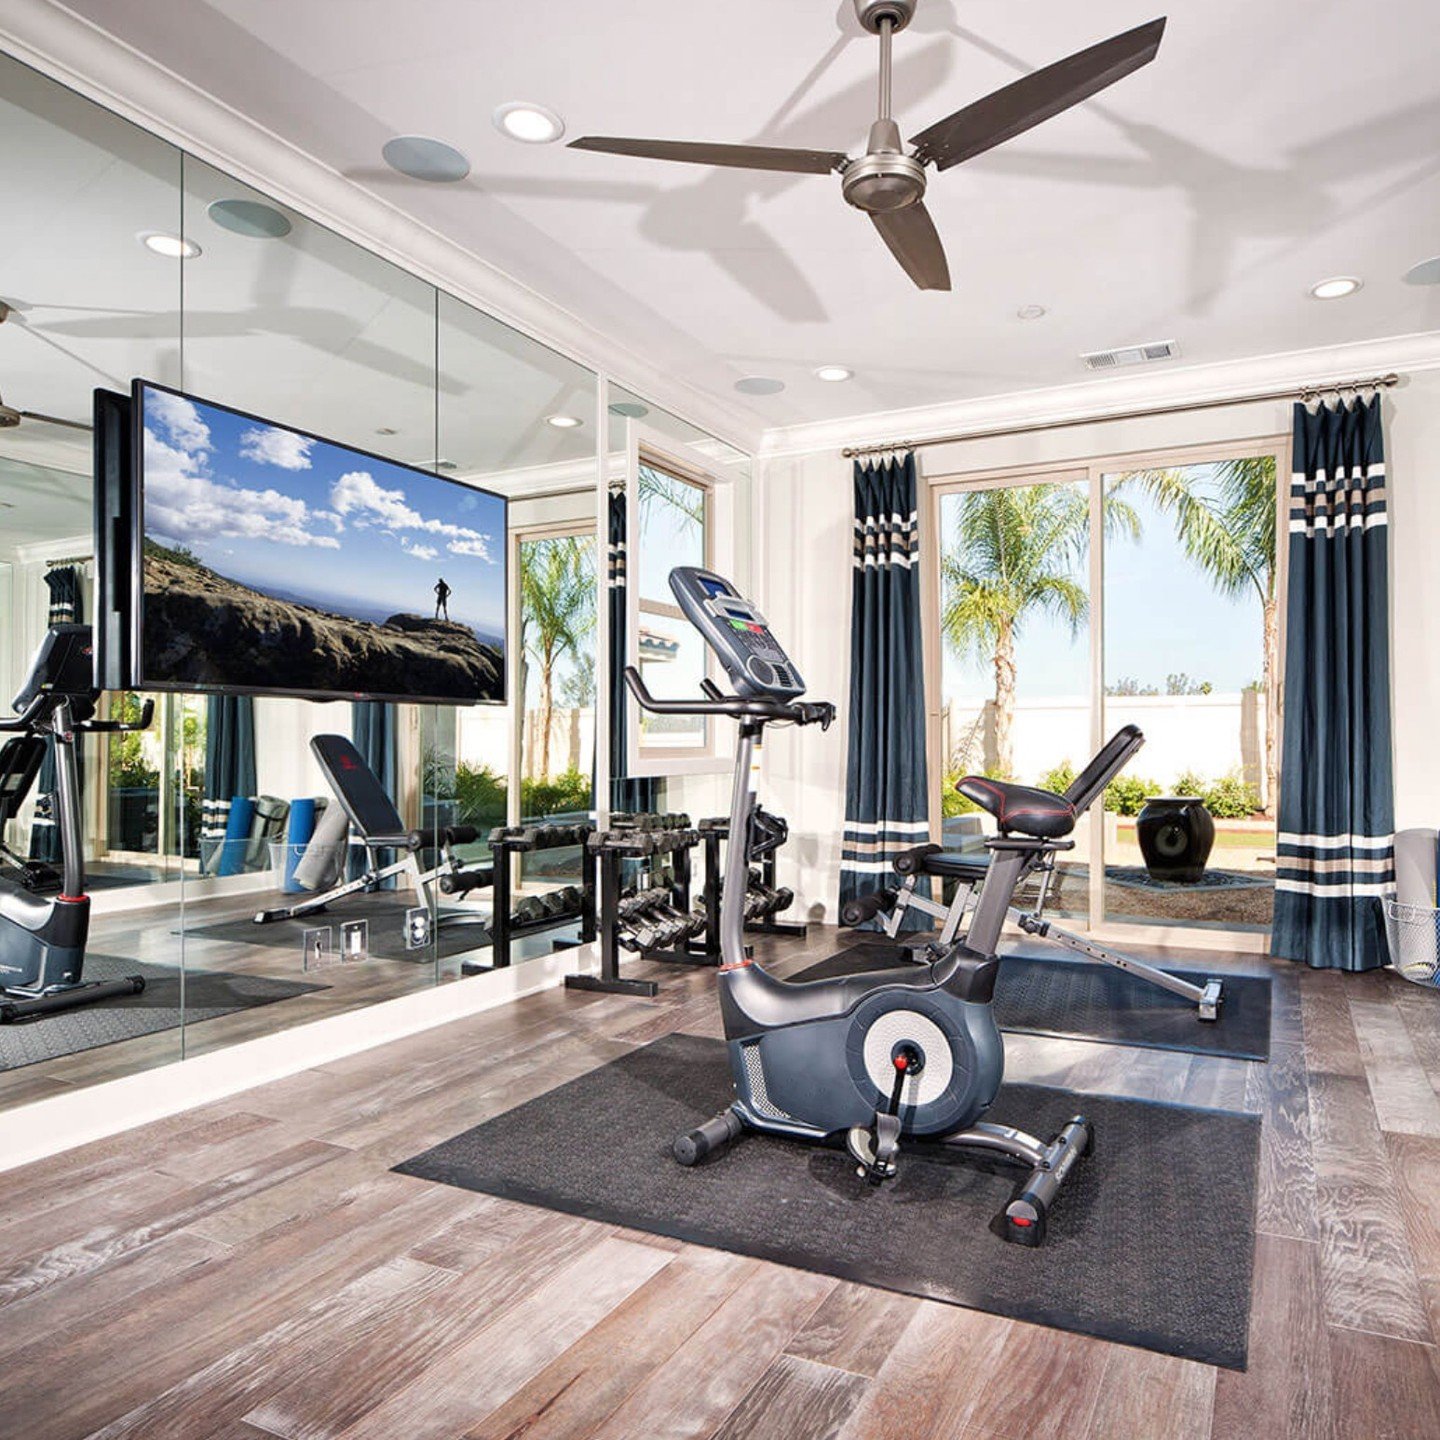 🌟 Integrating a TV into your Mirrored Wall 🌟 
Ever thought about adding a TV to your mirrored gym wall but worried it might disrupt the sleek look? 📺✨ At Iron House Design, we've mastered the art of integrating entertainment into your workouts wit